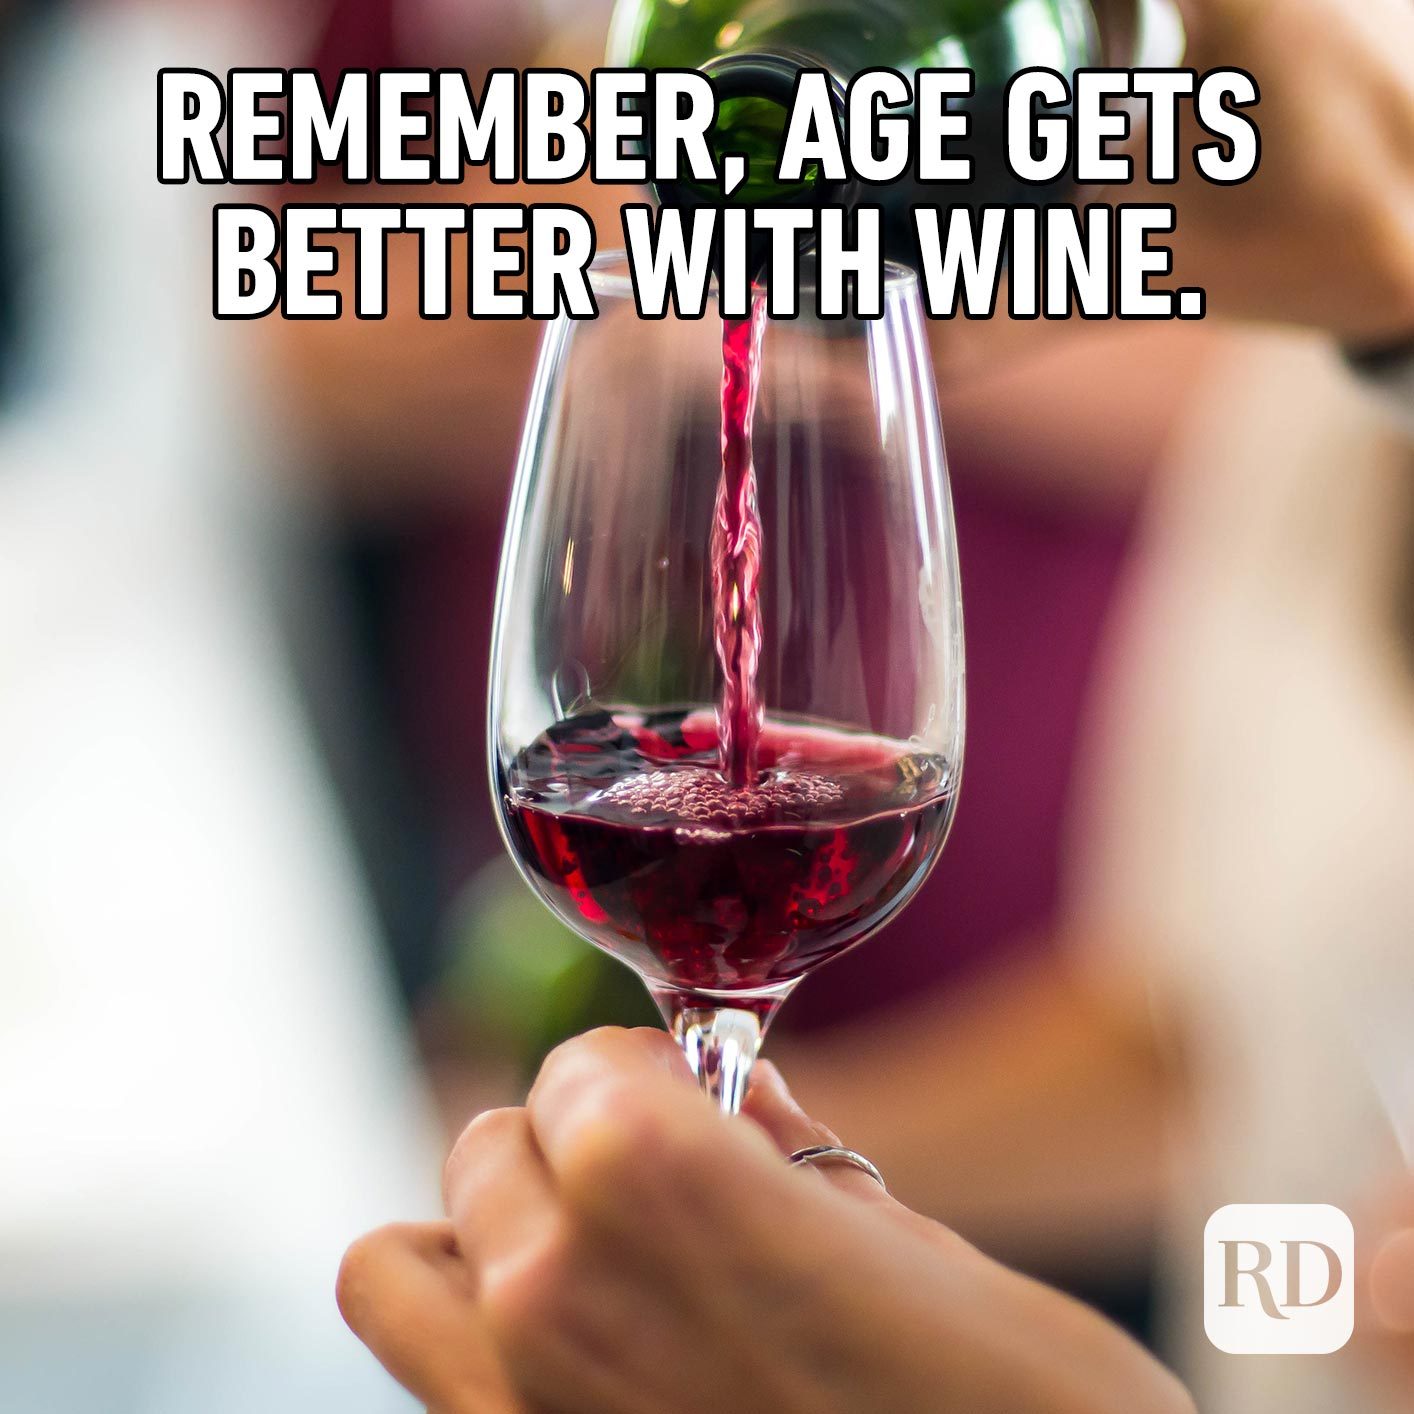 Remember, age gets better with wine.